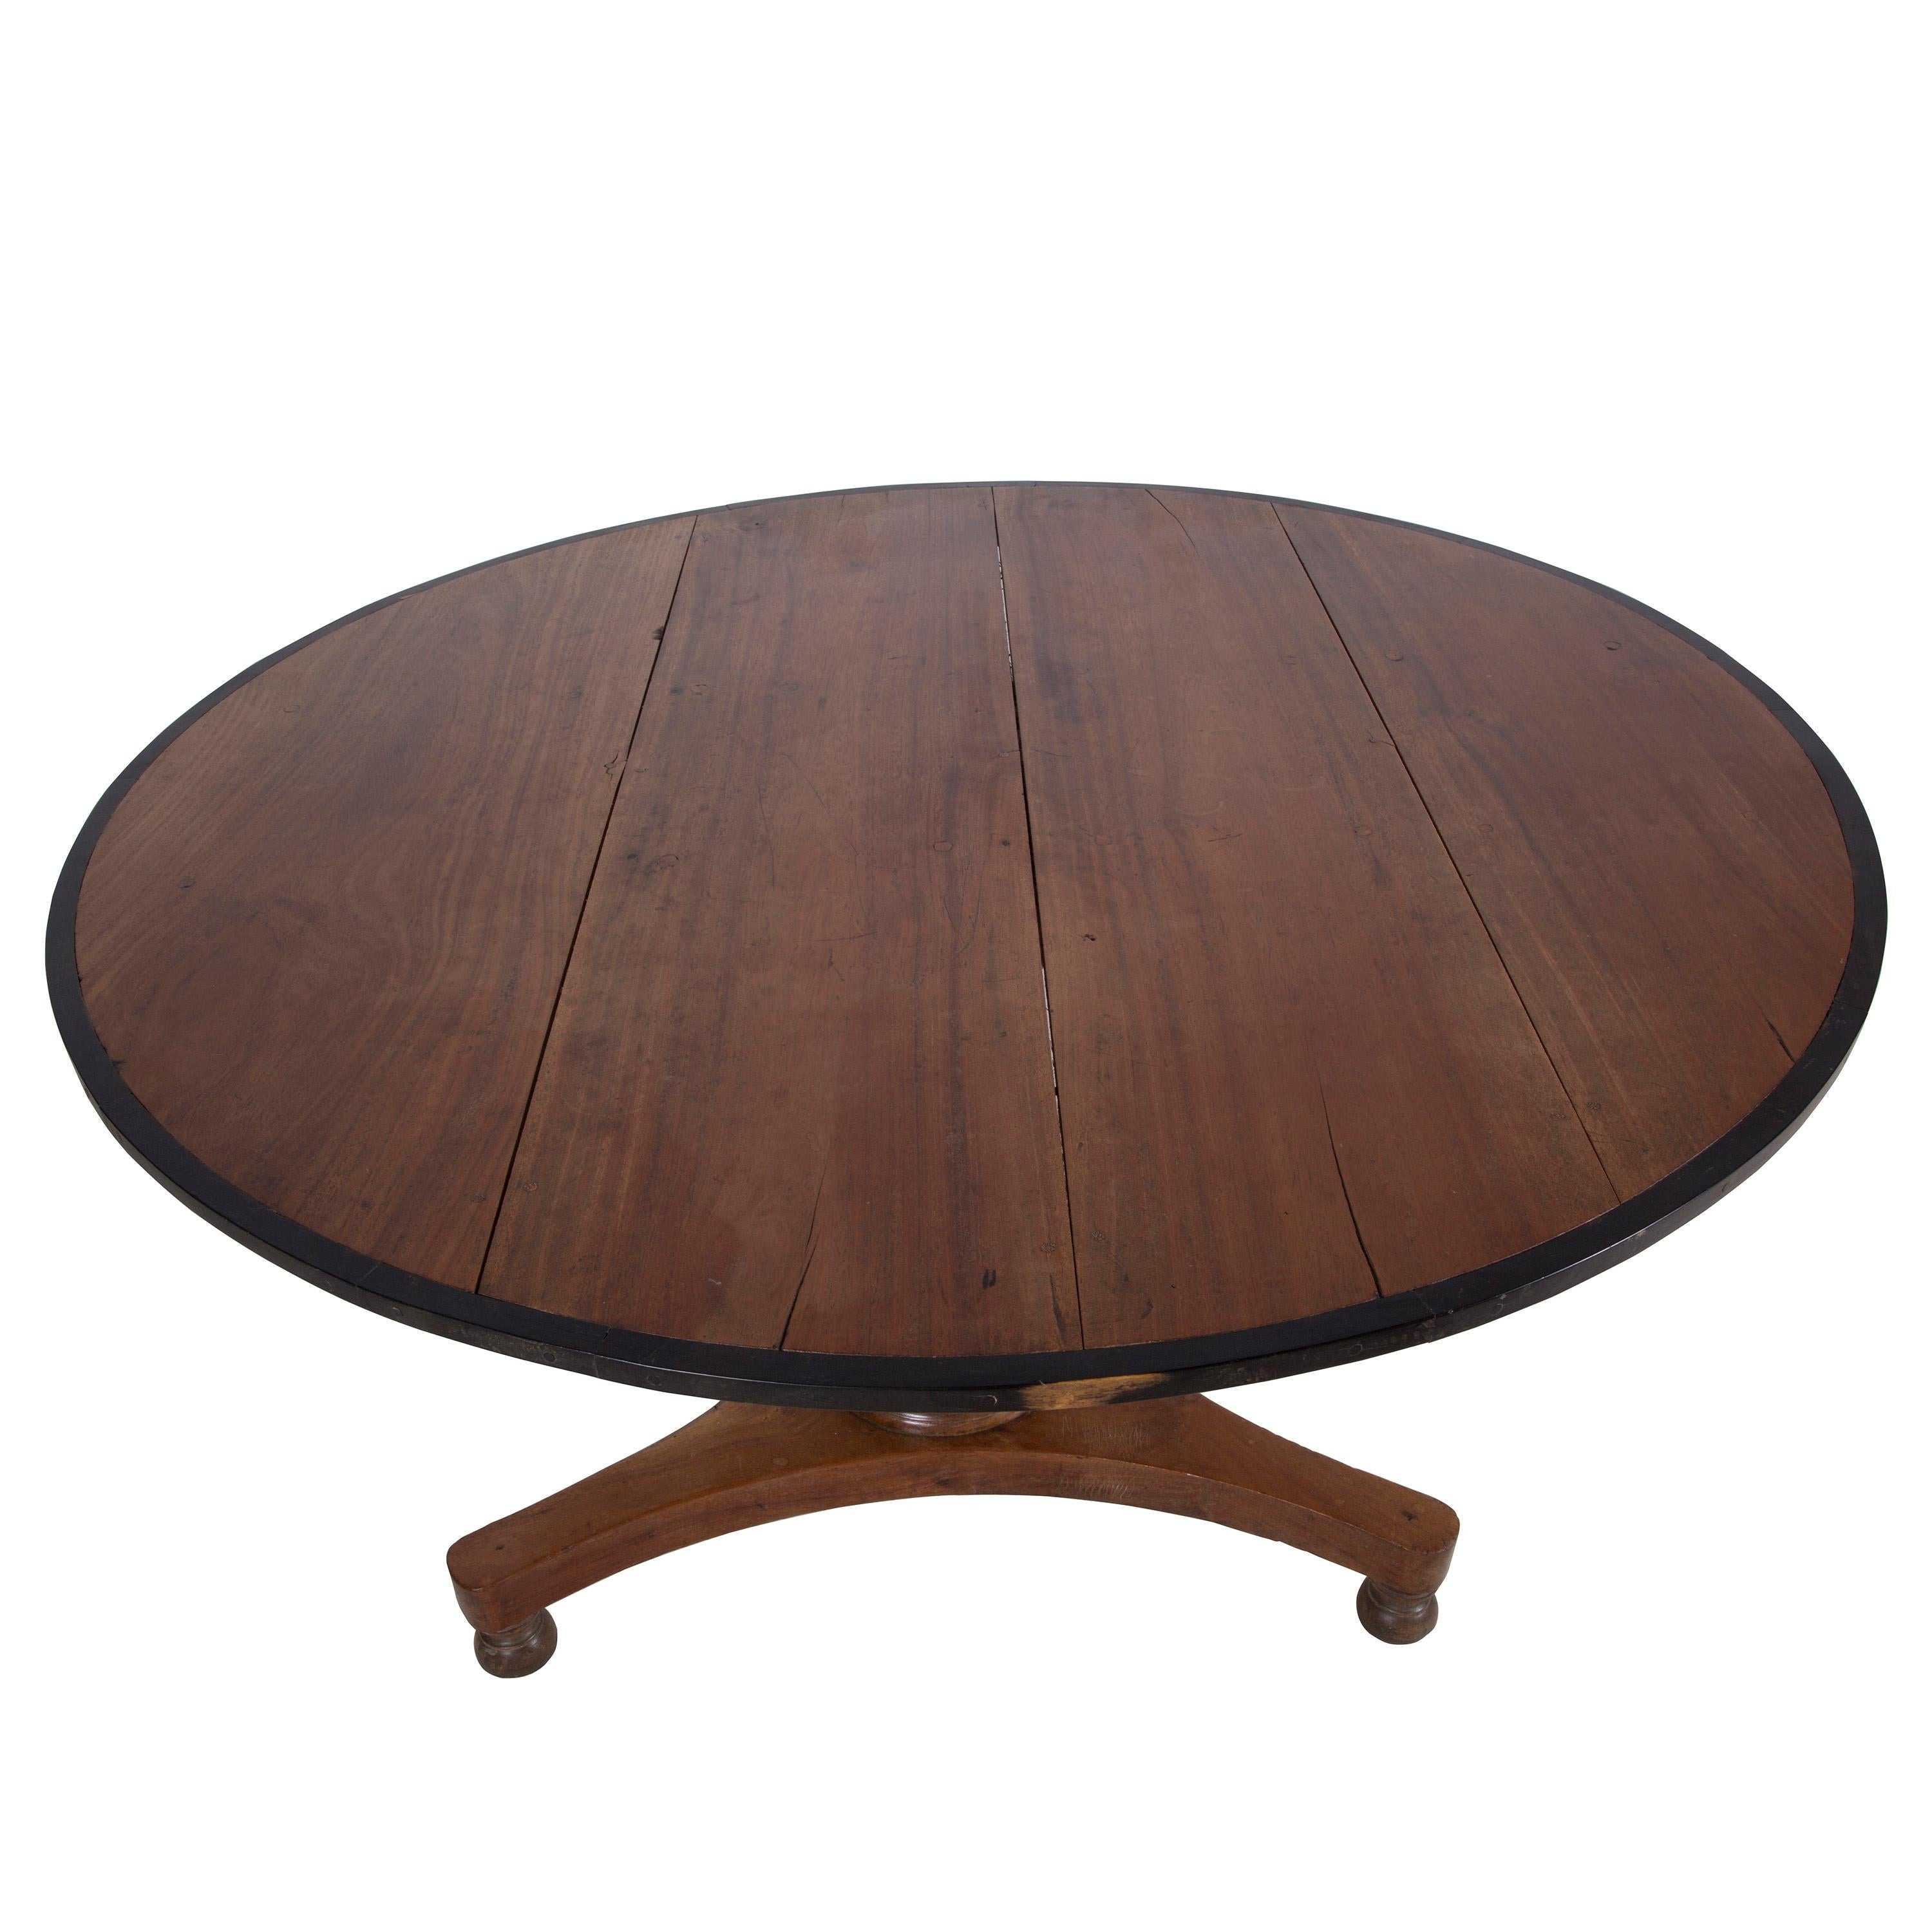 A simple and chic Anglo-Indian centre table in padouk and ebony, circa 1870.